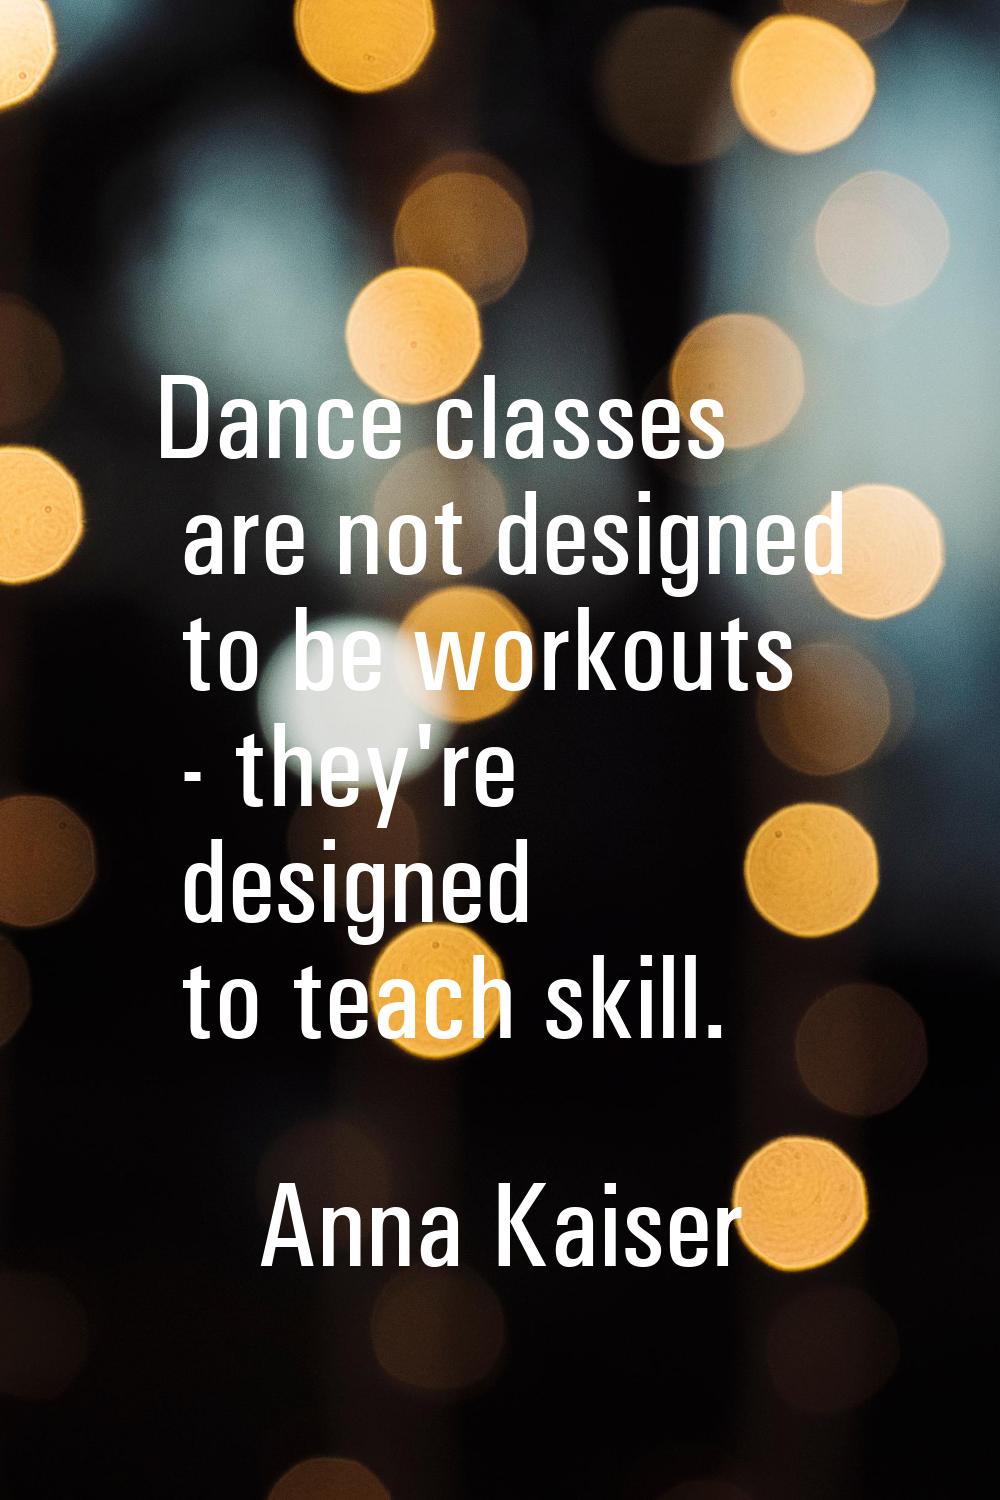 Dance classes are not designed to be workouts - they're designed to teach skill.